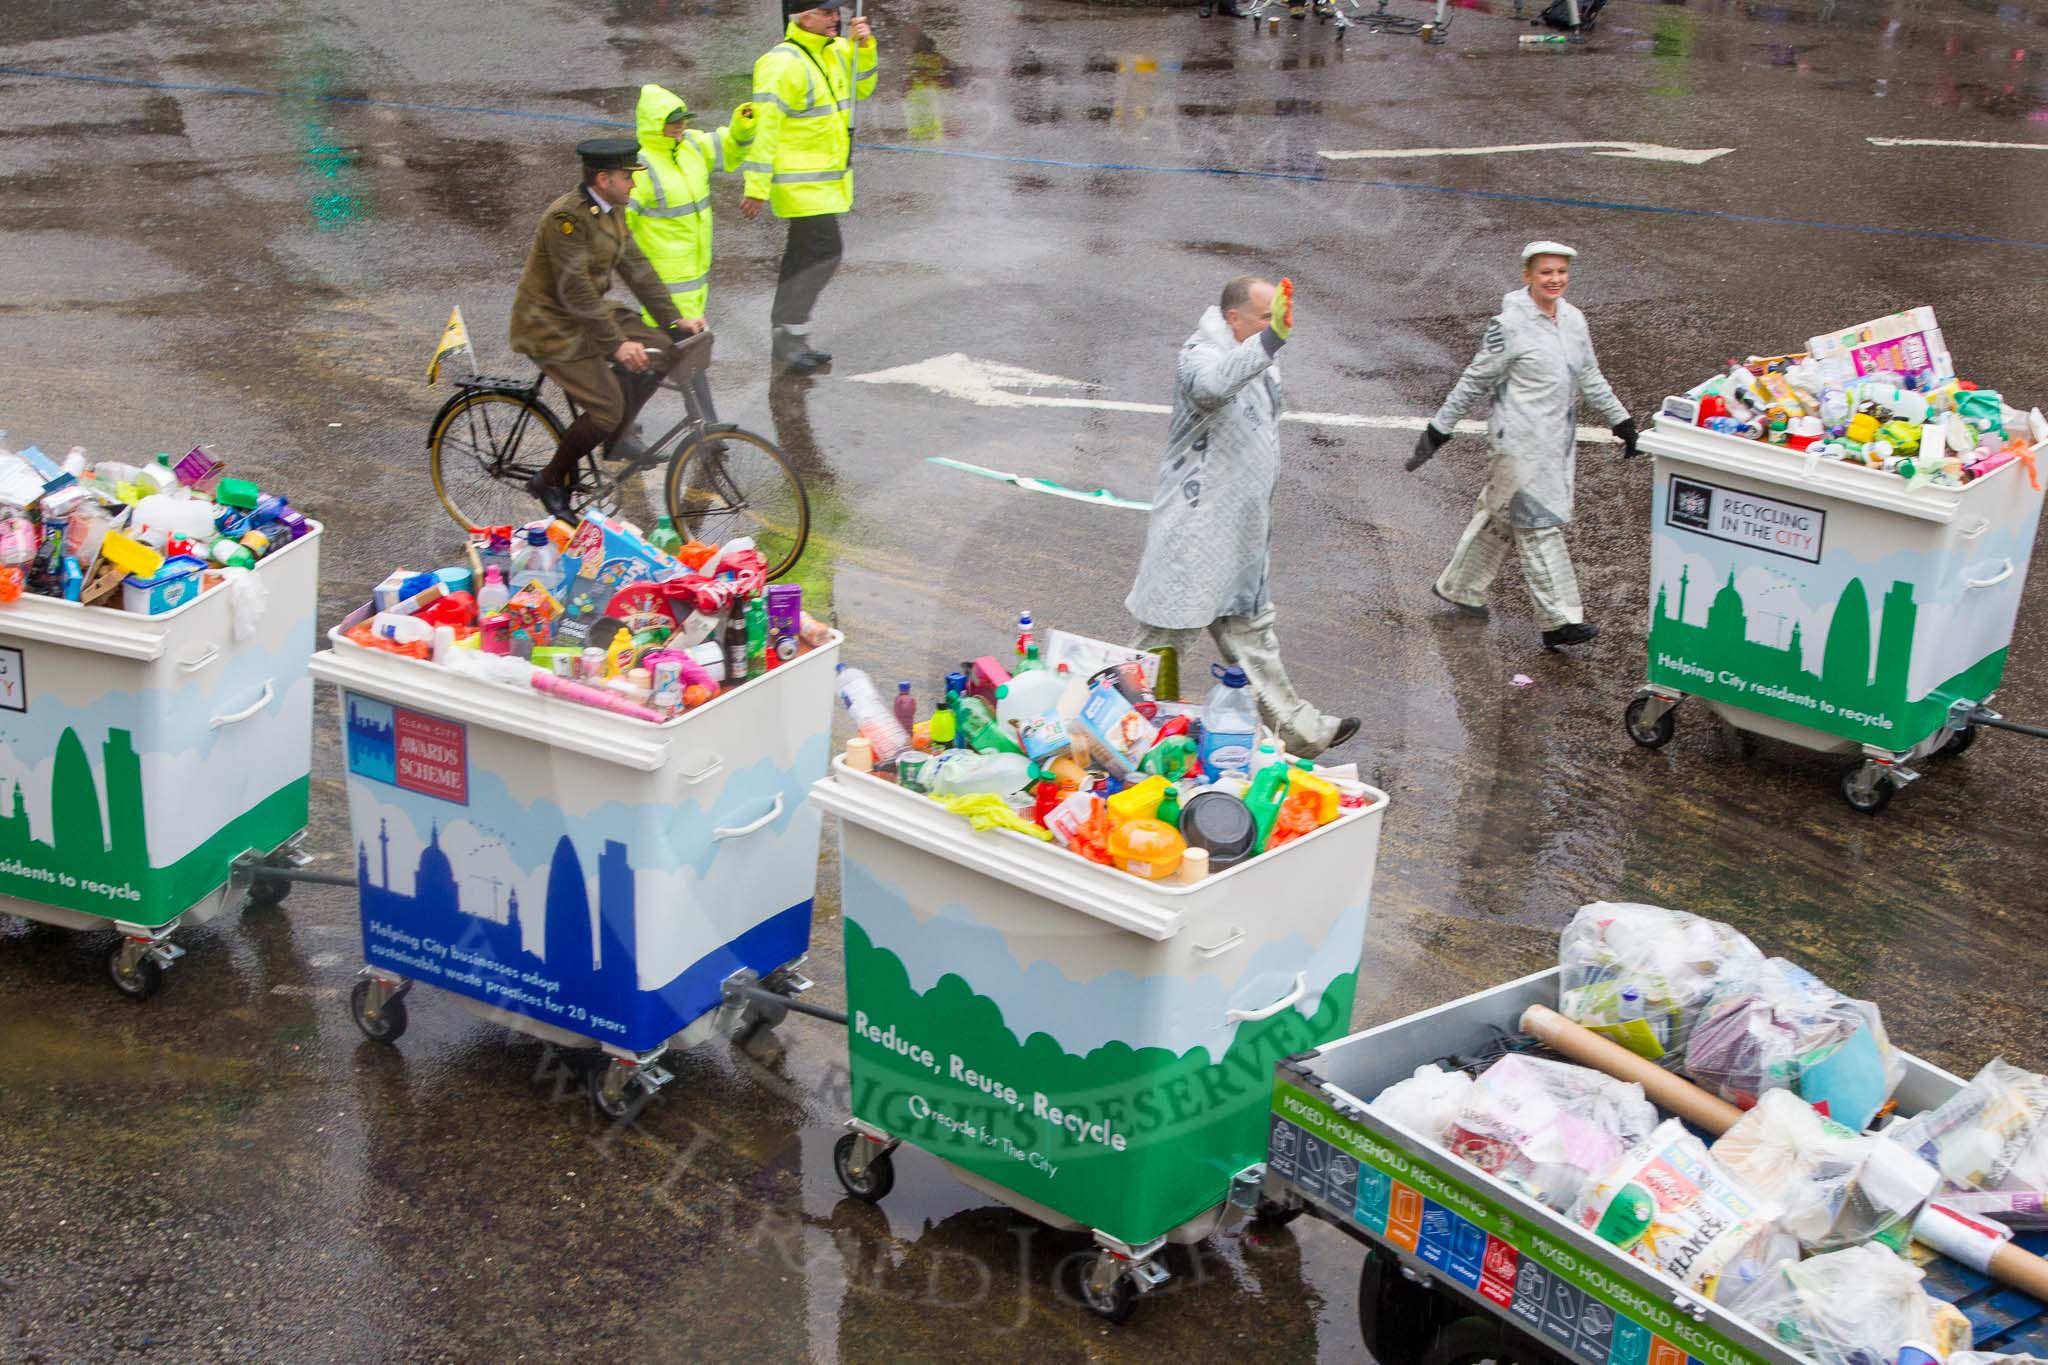 Lord Mayor's Show 2013: 59-Recycling in the City- The Binbot is joined again by his drumming street sweepers to celebrate 20th anniversary of the City's unique Clean City Awards scheme..
Press stand opposite Mansion House, City of London,
London,
Greater London,
United Kingdom,
on 09 November 2013 at 11:32, image #754